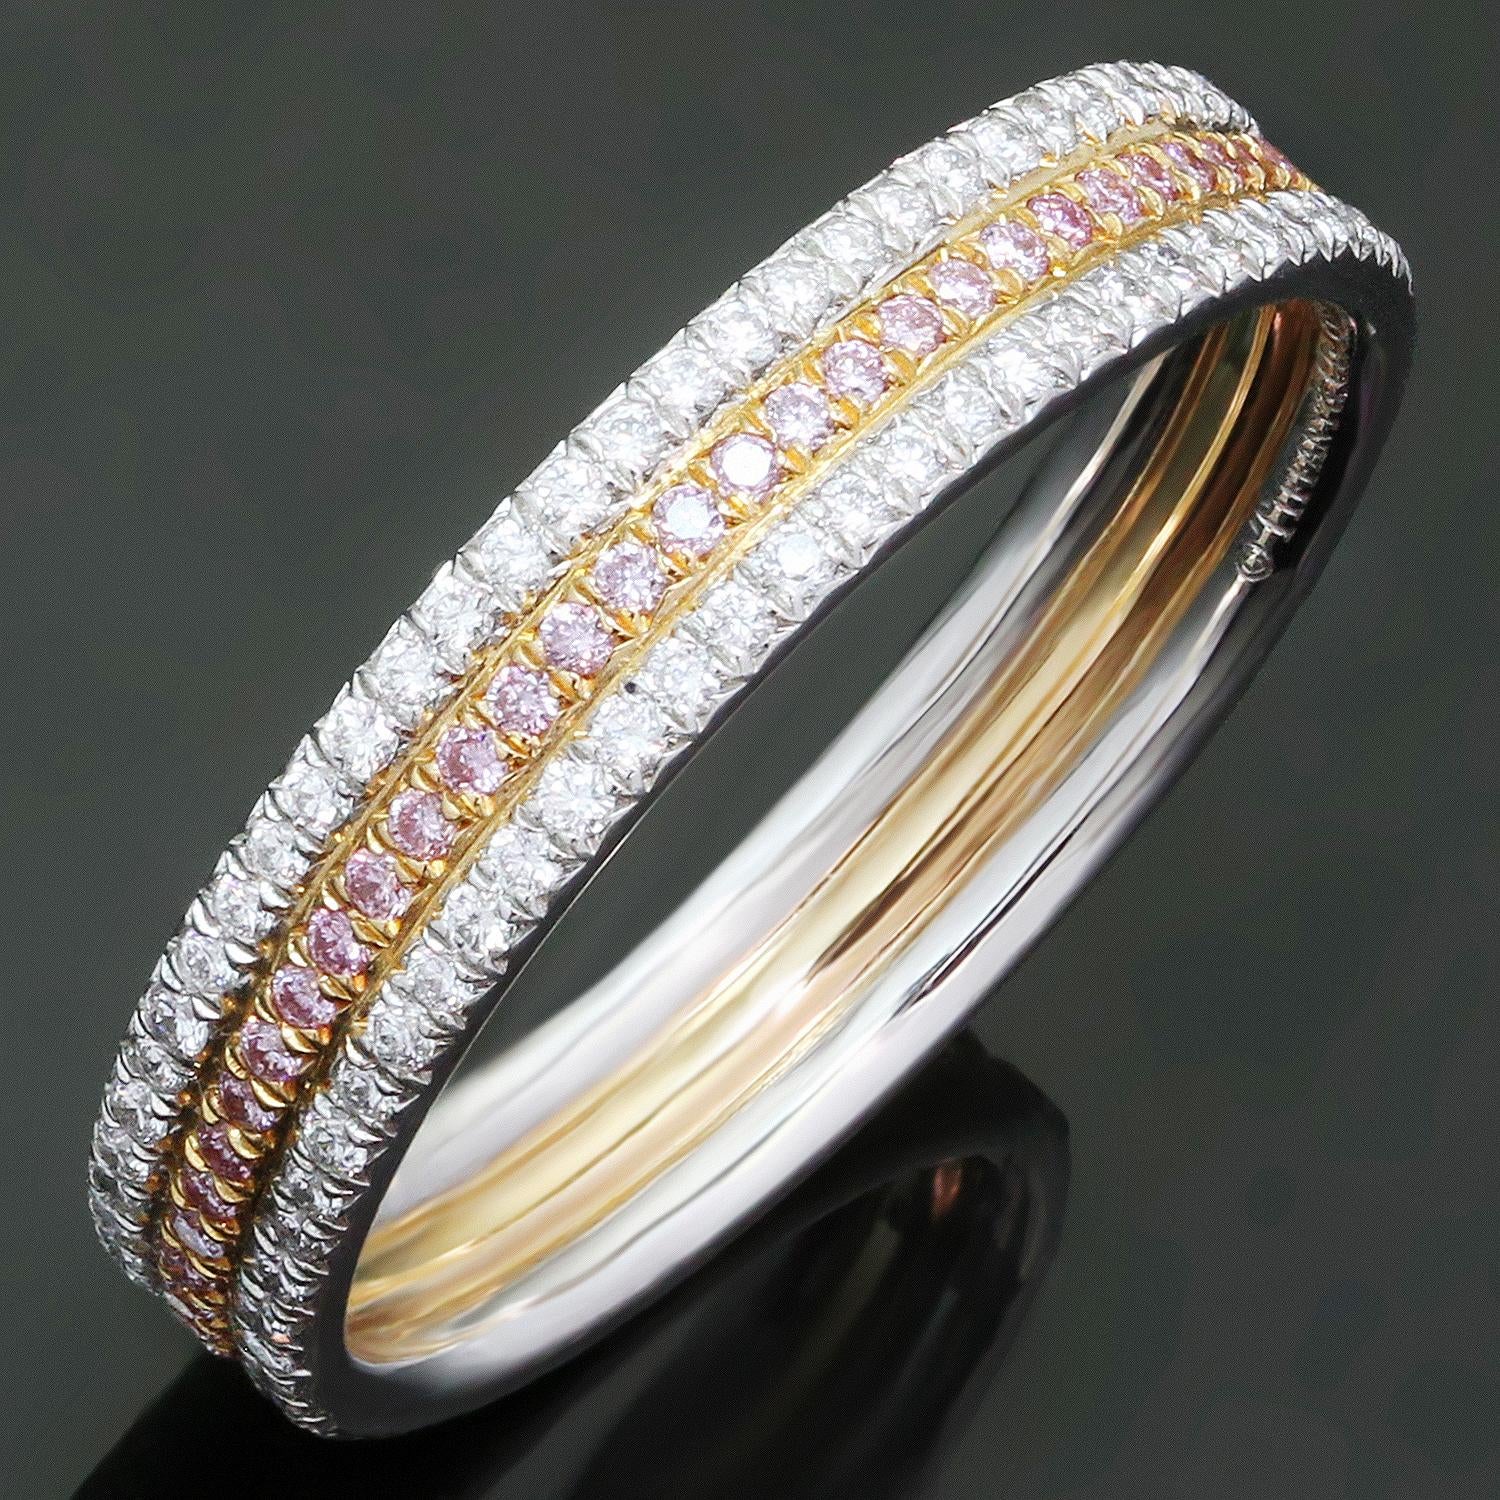 This stunning three-row band from Tiffany & Co. features white & pink F-G VVS2-VS1 brilliant-cut round diamonds of an estimated 0.55 carats, with pink diamonds set in 18k rose gold and white diamonds set in 950 paltinum. Made in United States circa